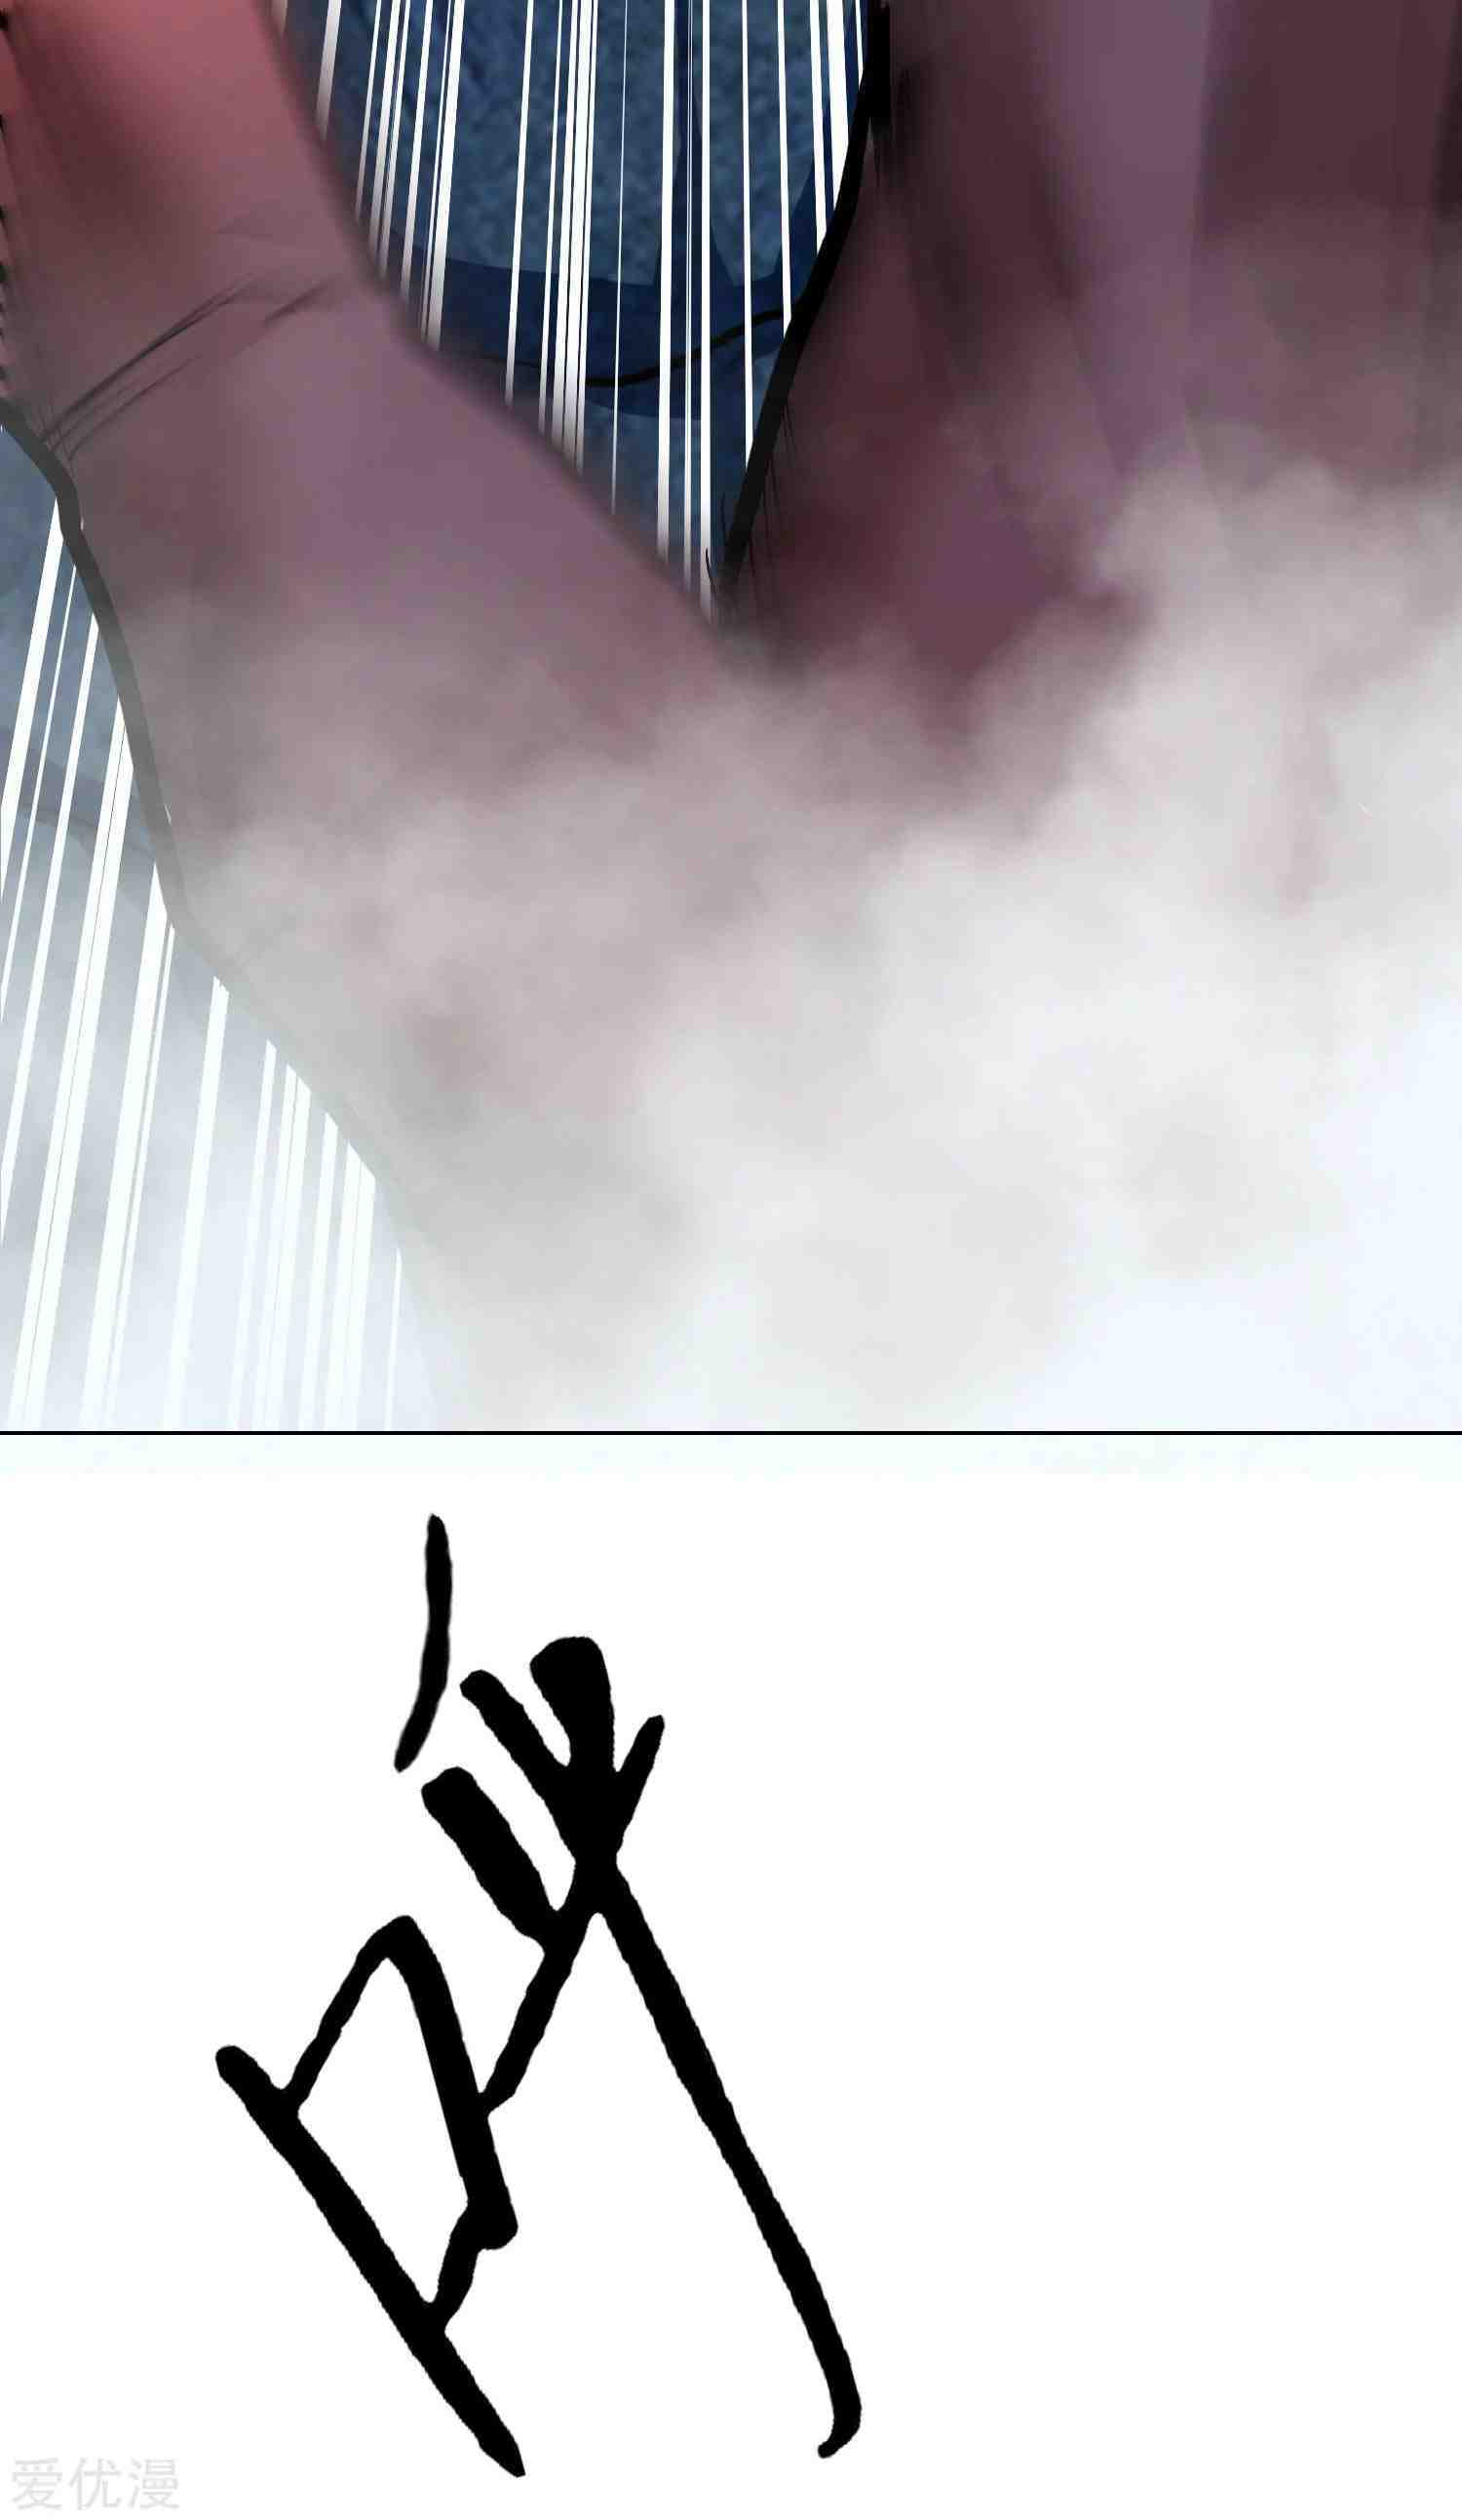 Xianzun System in the City Chapter 31